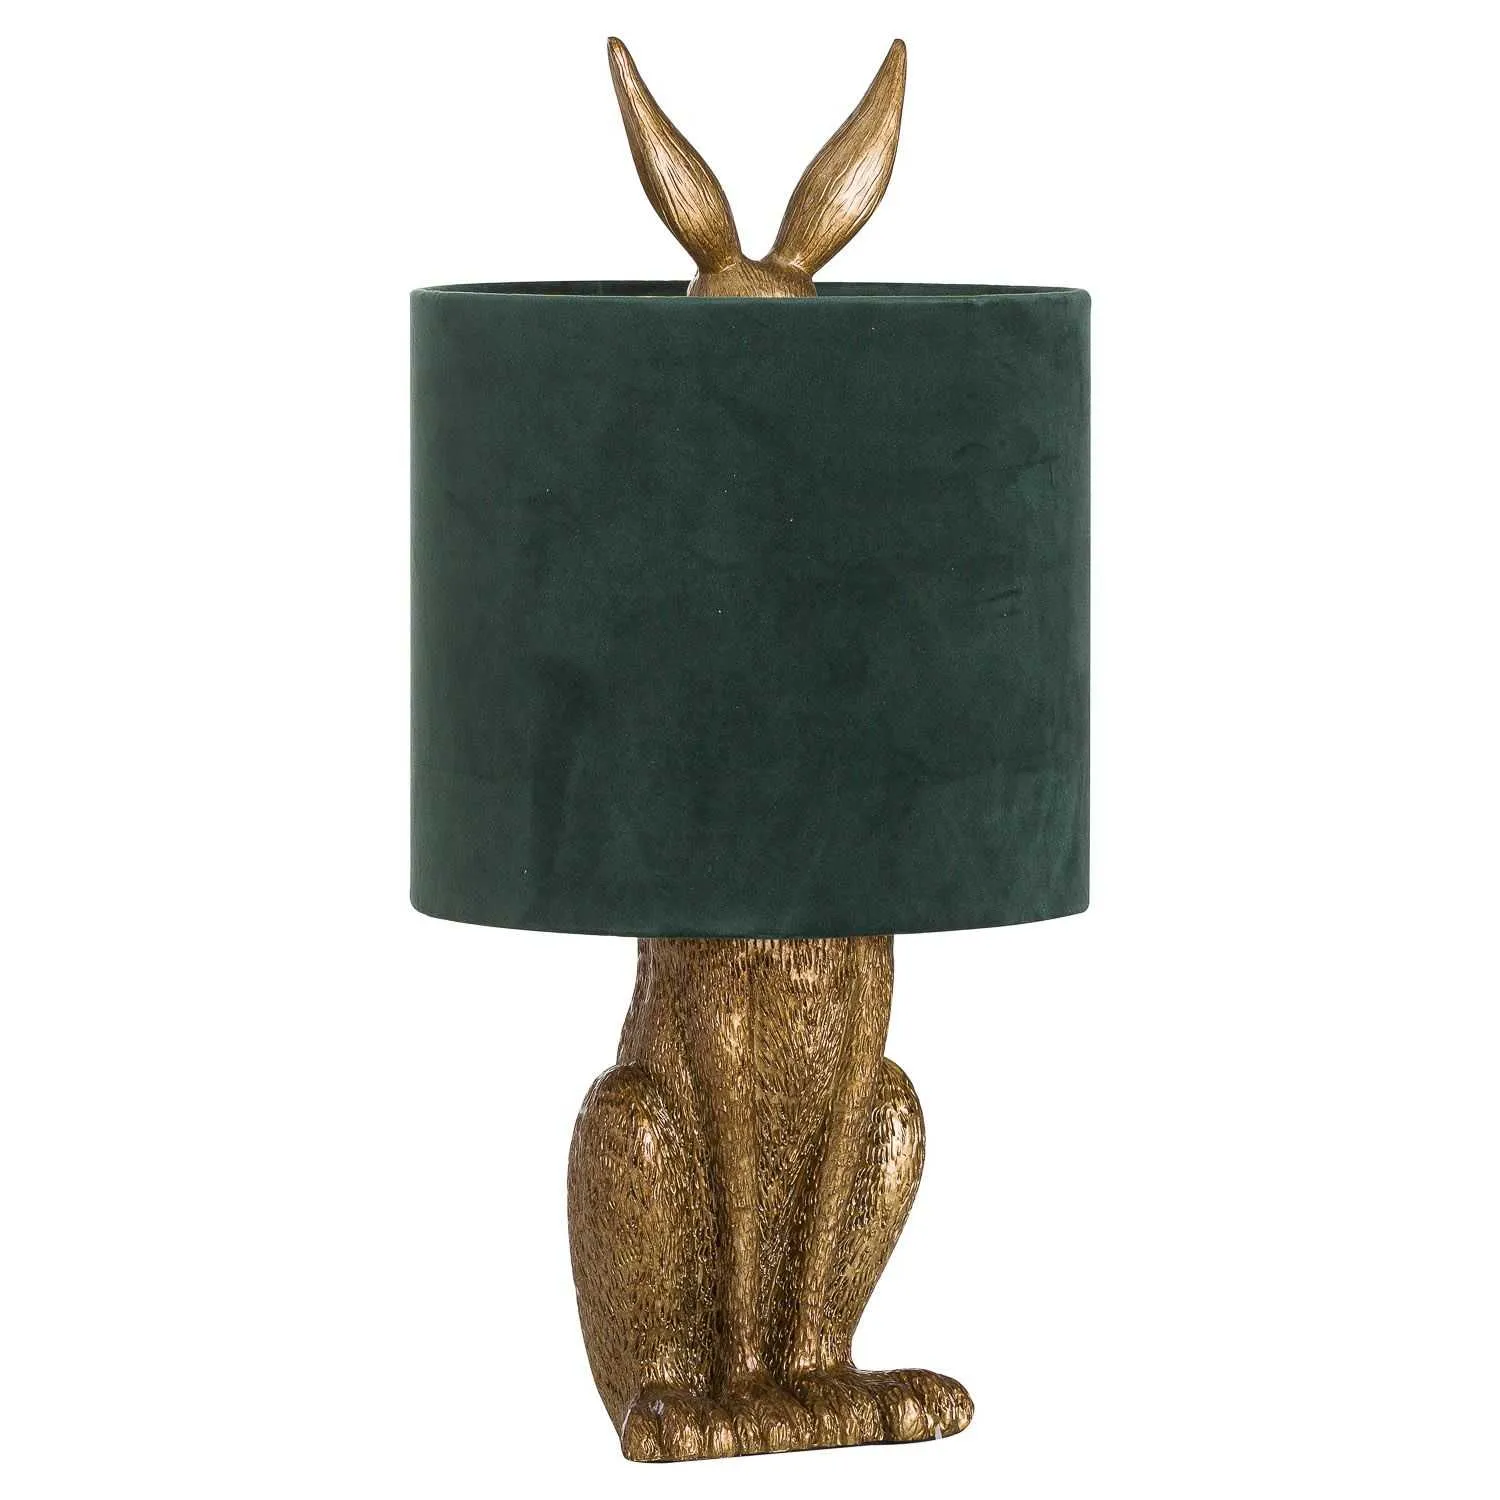 50cm Tall Antique Gold Hare Rabbit Table Lamp With Green Velvet Round Shade